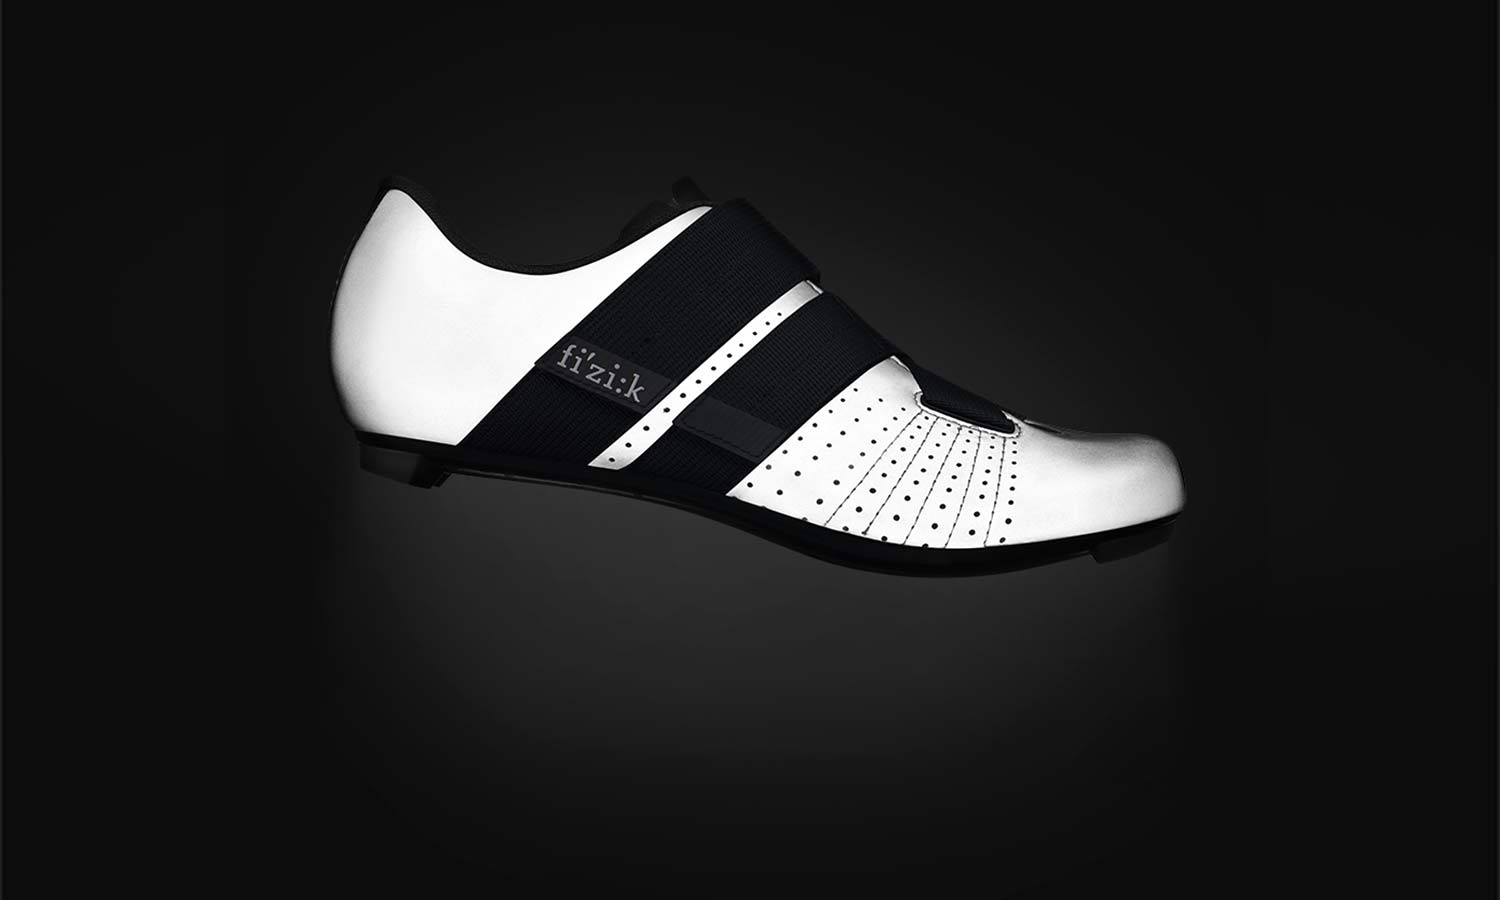 Fizik Powerstrap R5 Reflective road shoe catches eyes, opens up Concepts prototypes